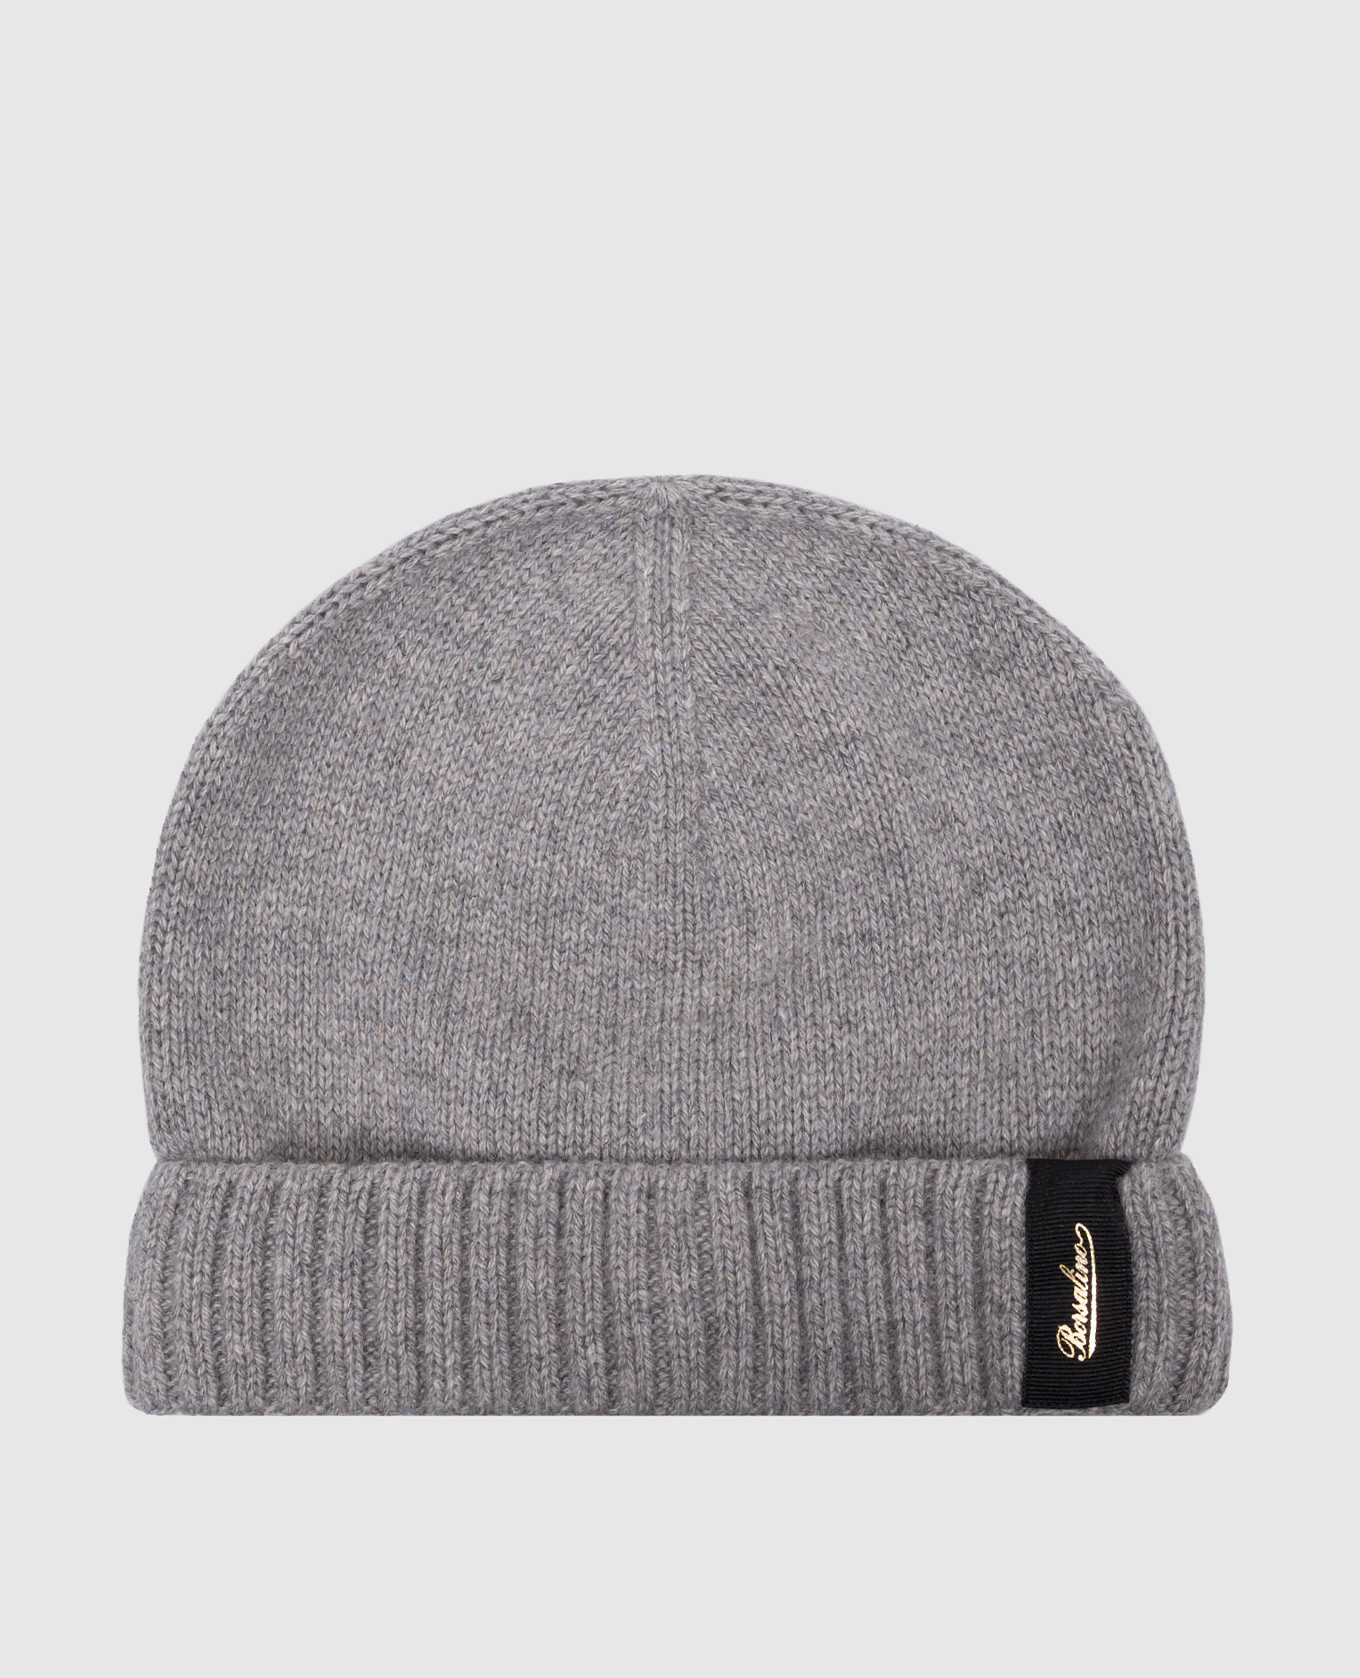 Gray cashmere hat with logo